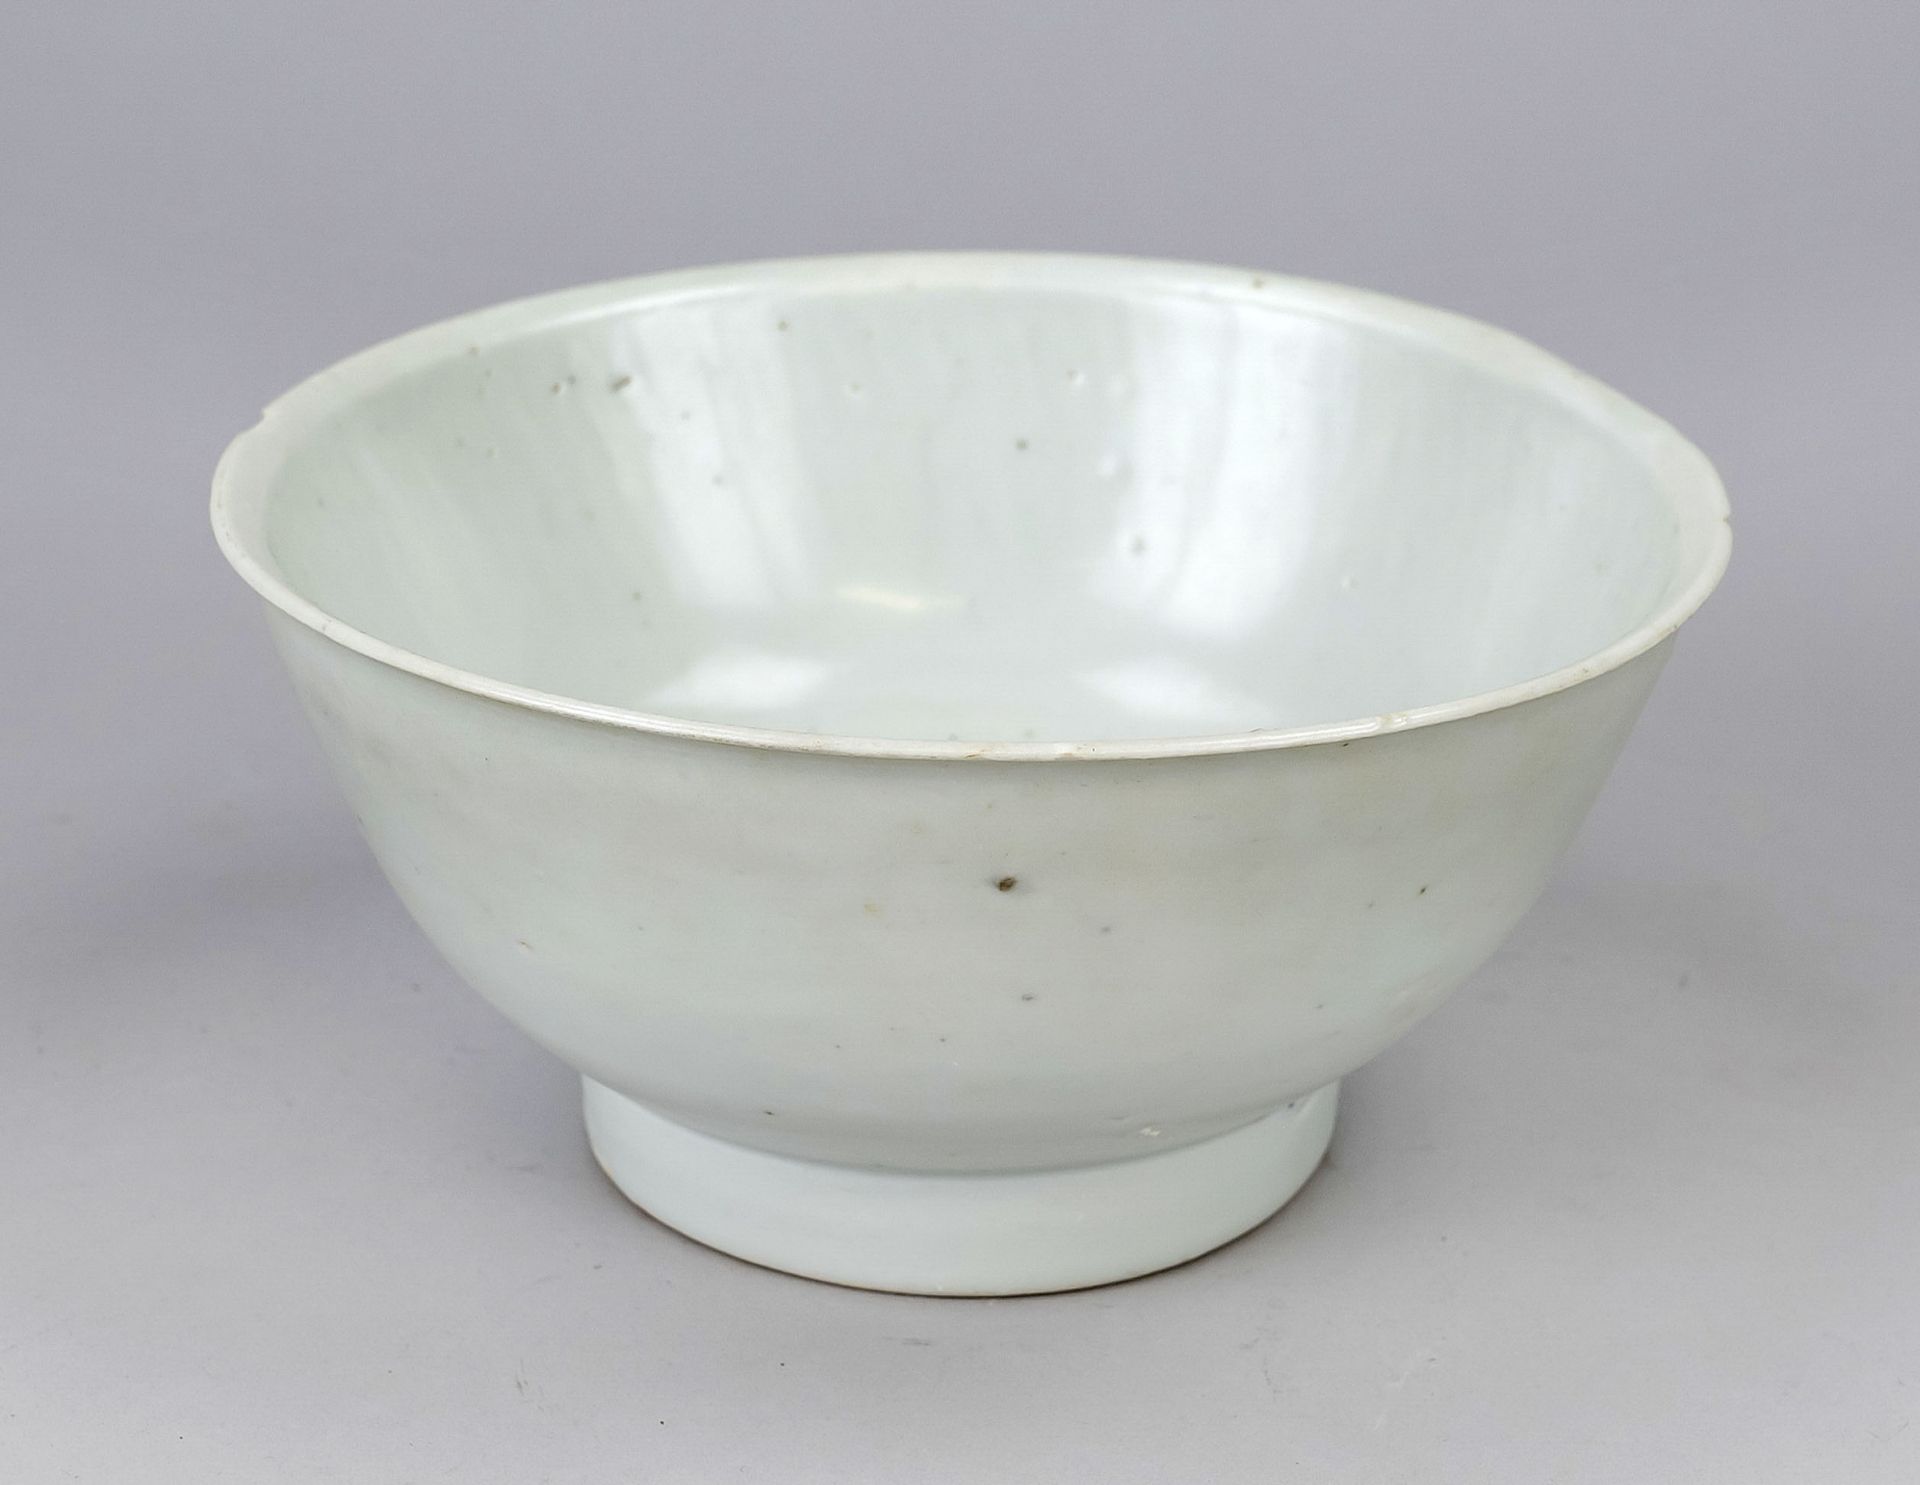 Large food bowl, China, Ming dynasty (1368-1644), 16th/17th century, porcelain with bluish